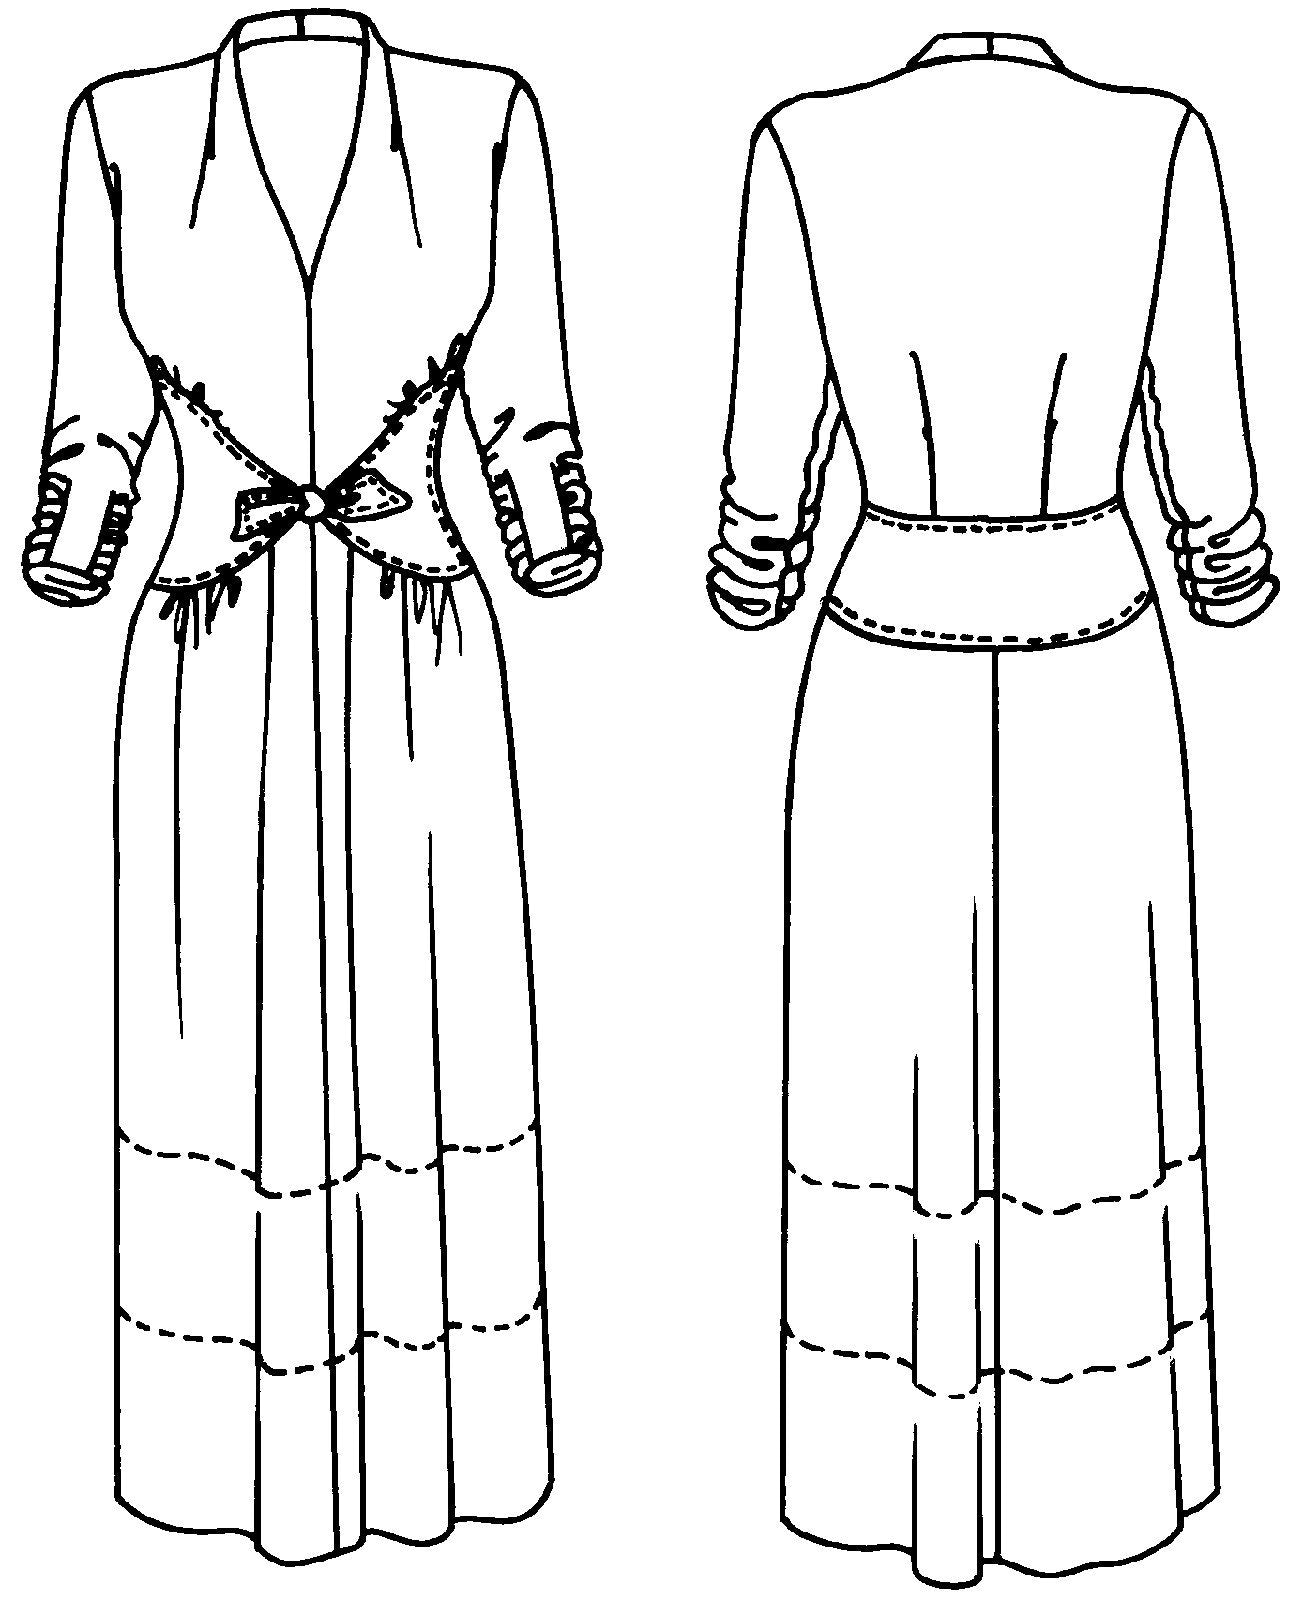 Black and white pattern drawing of front and back view of 233 Glamour Girl Dress.